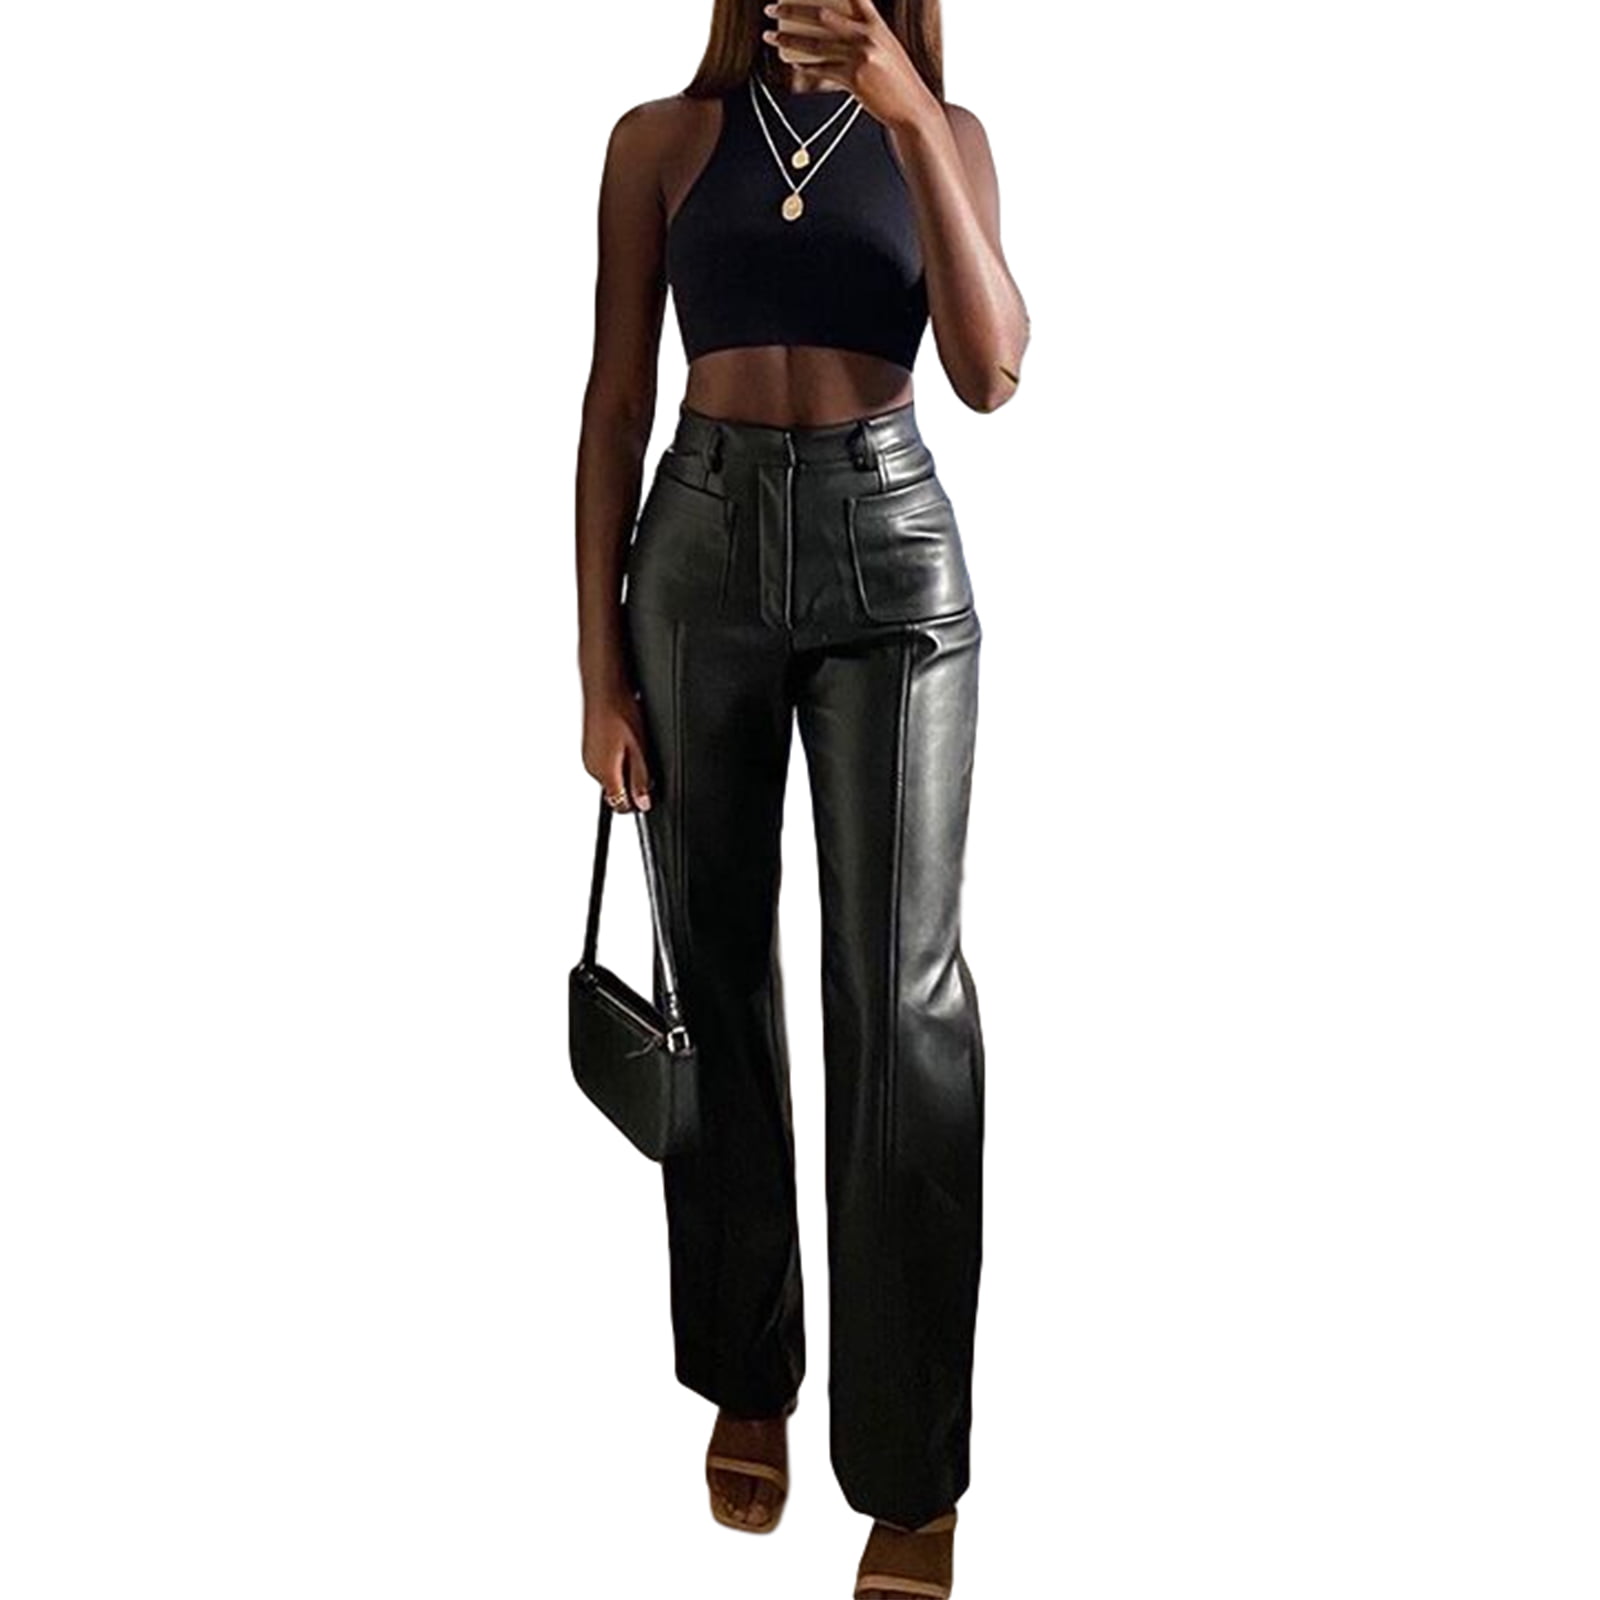 Womens Faux Leather Slim Fit Pants High Waist Stretchy Long Trousers Casual 2019 